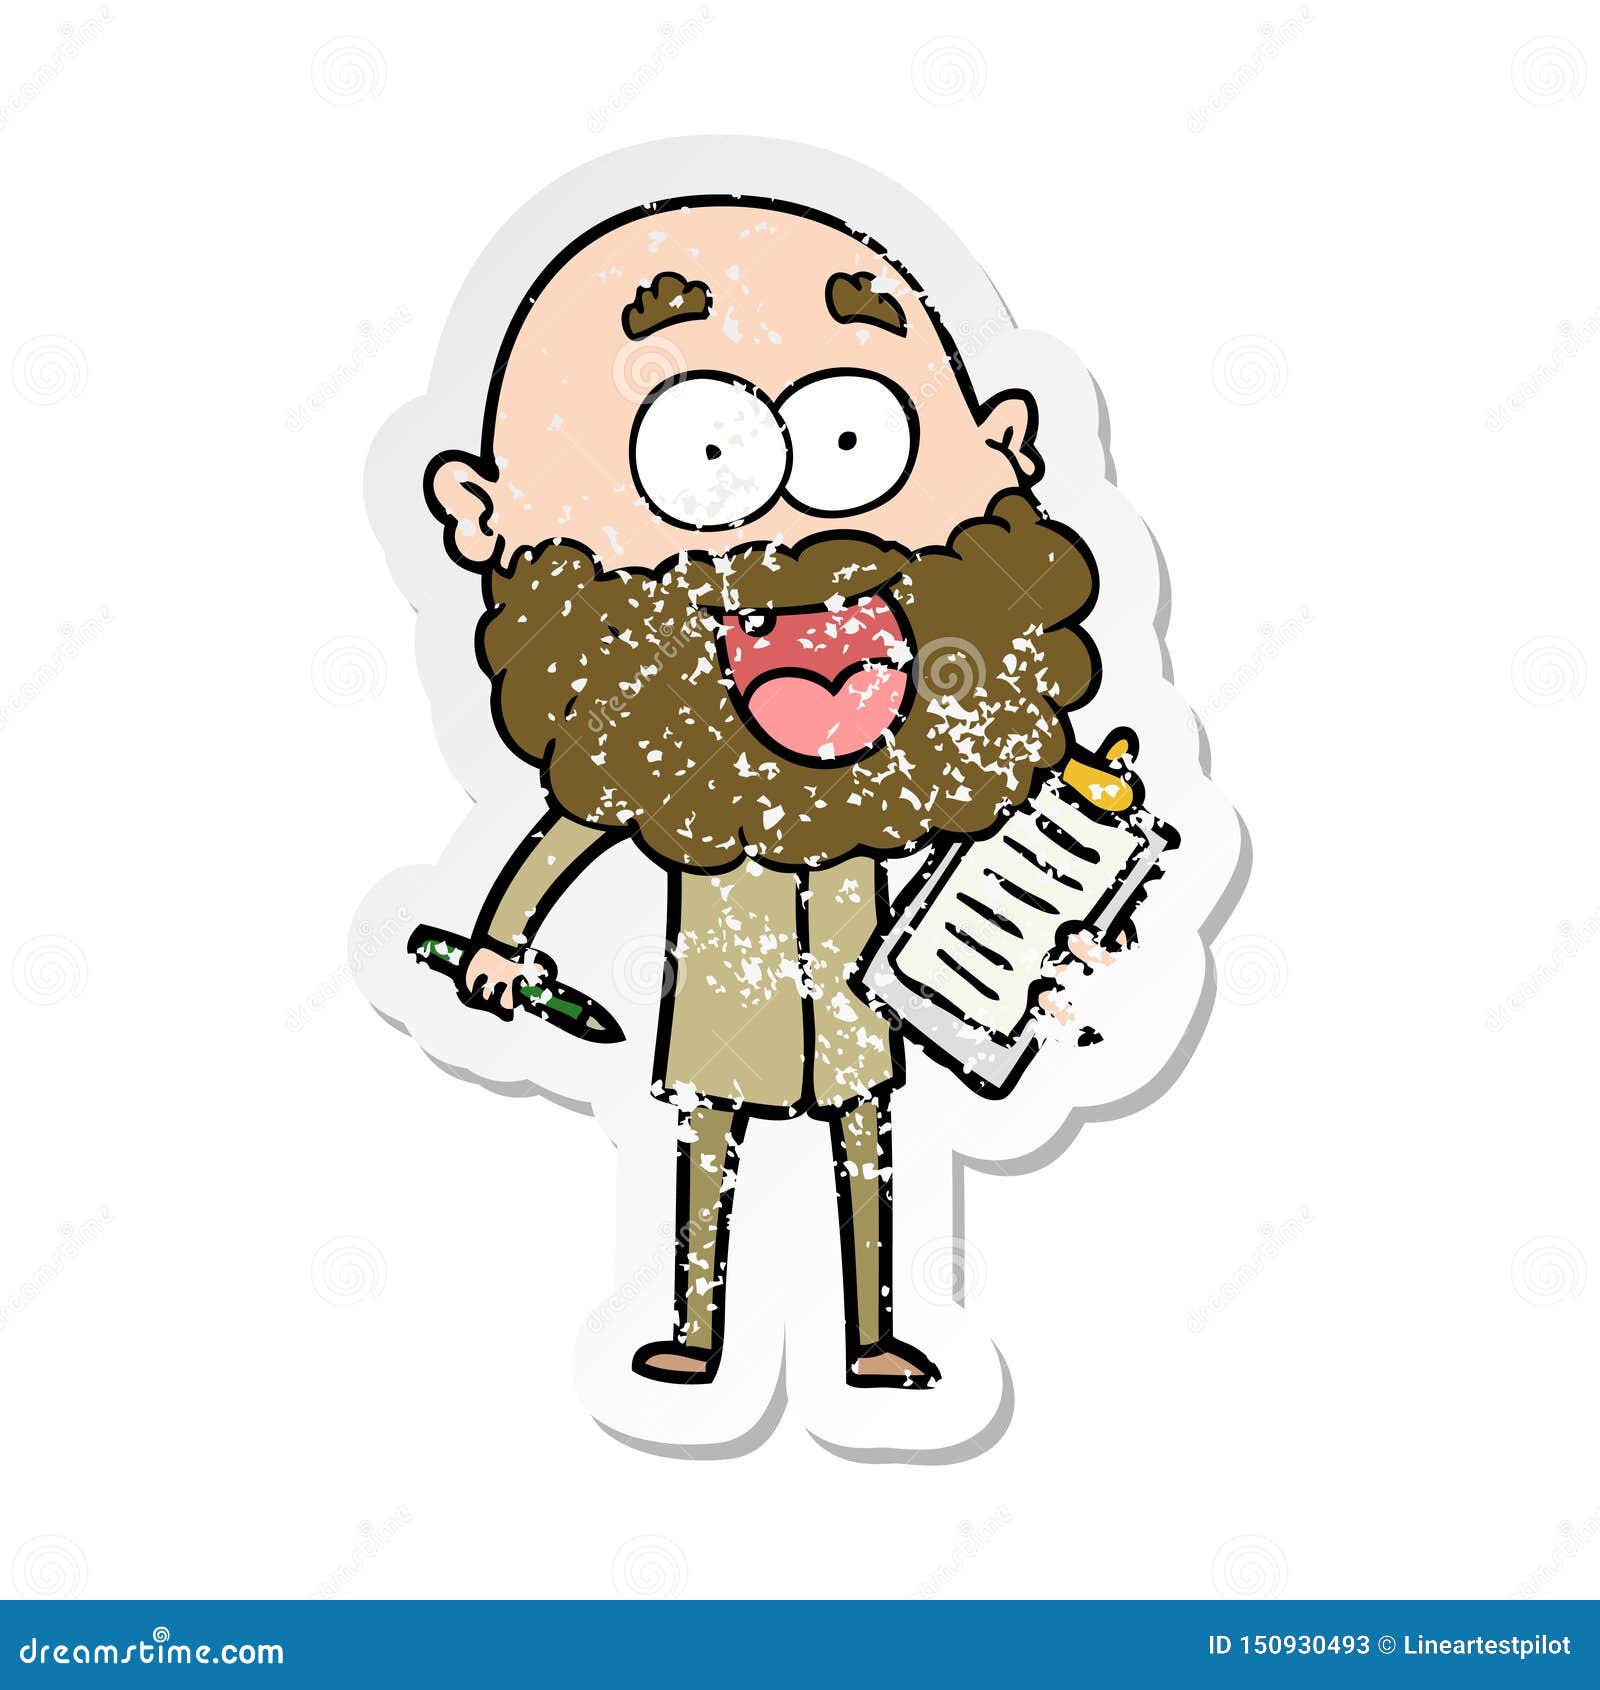 A Creative Distressed Sticker Of A Cartoon Crazy Happy Man With Beard